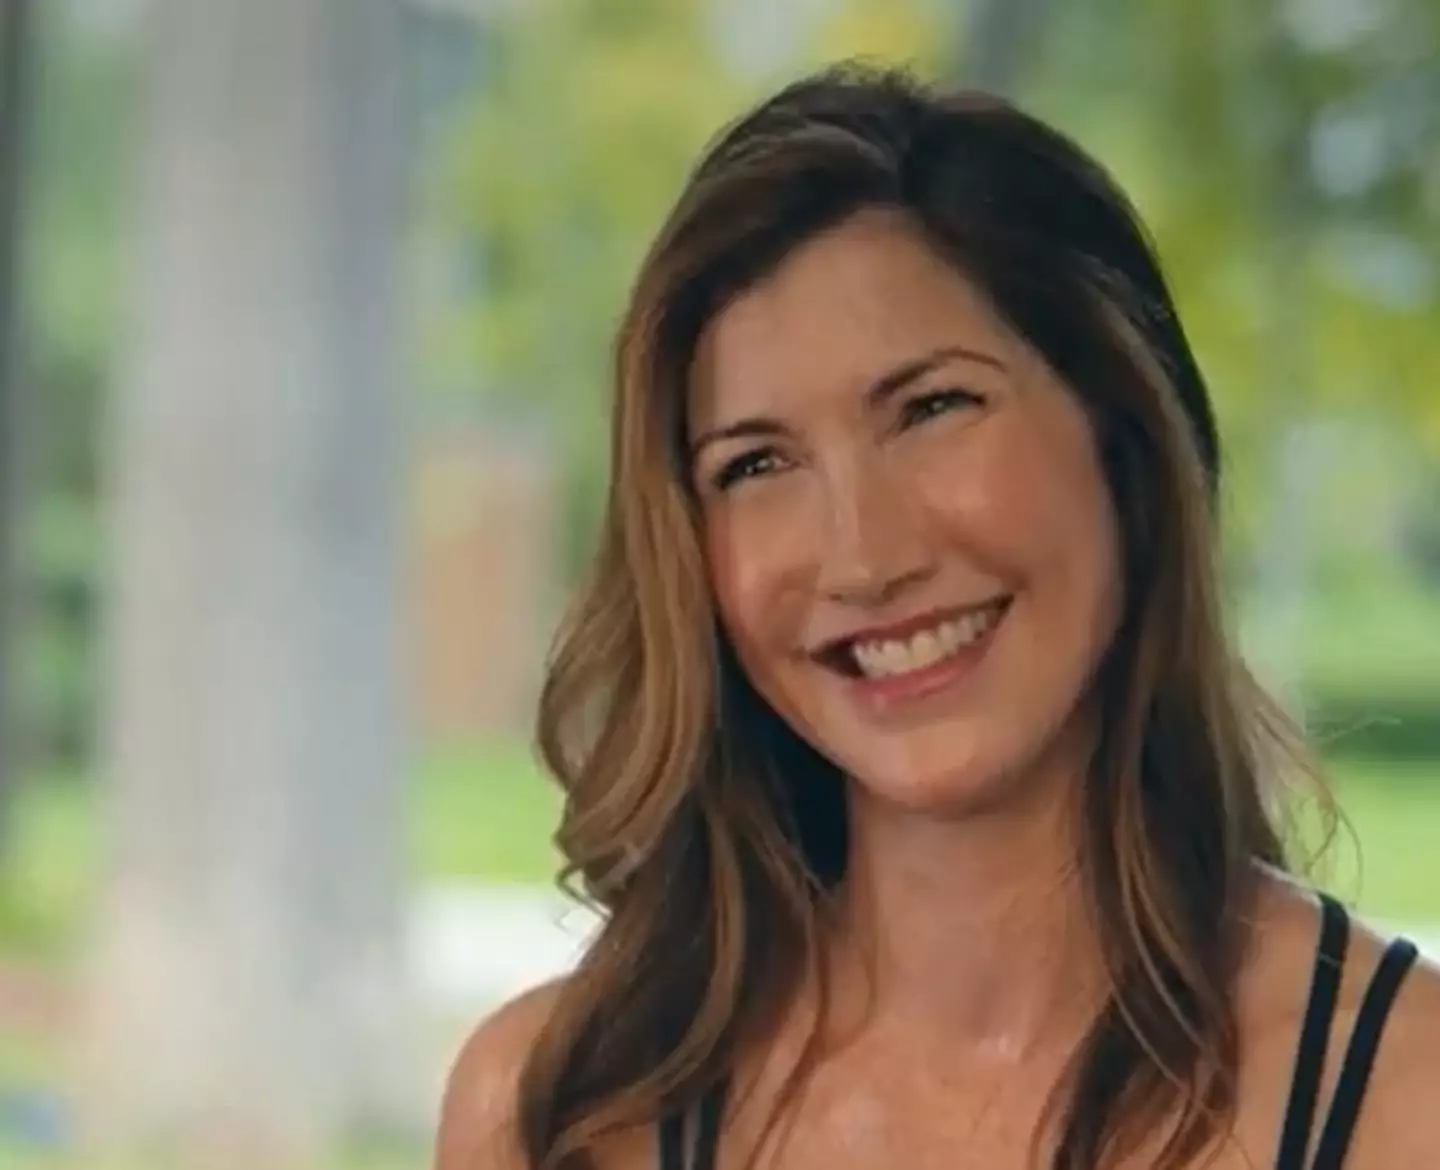 Jackie Sandler is also in the movie, but as the other family's mom.